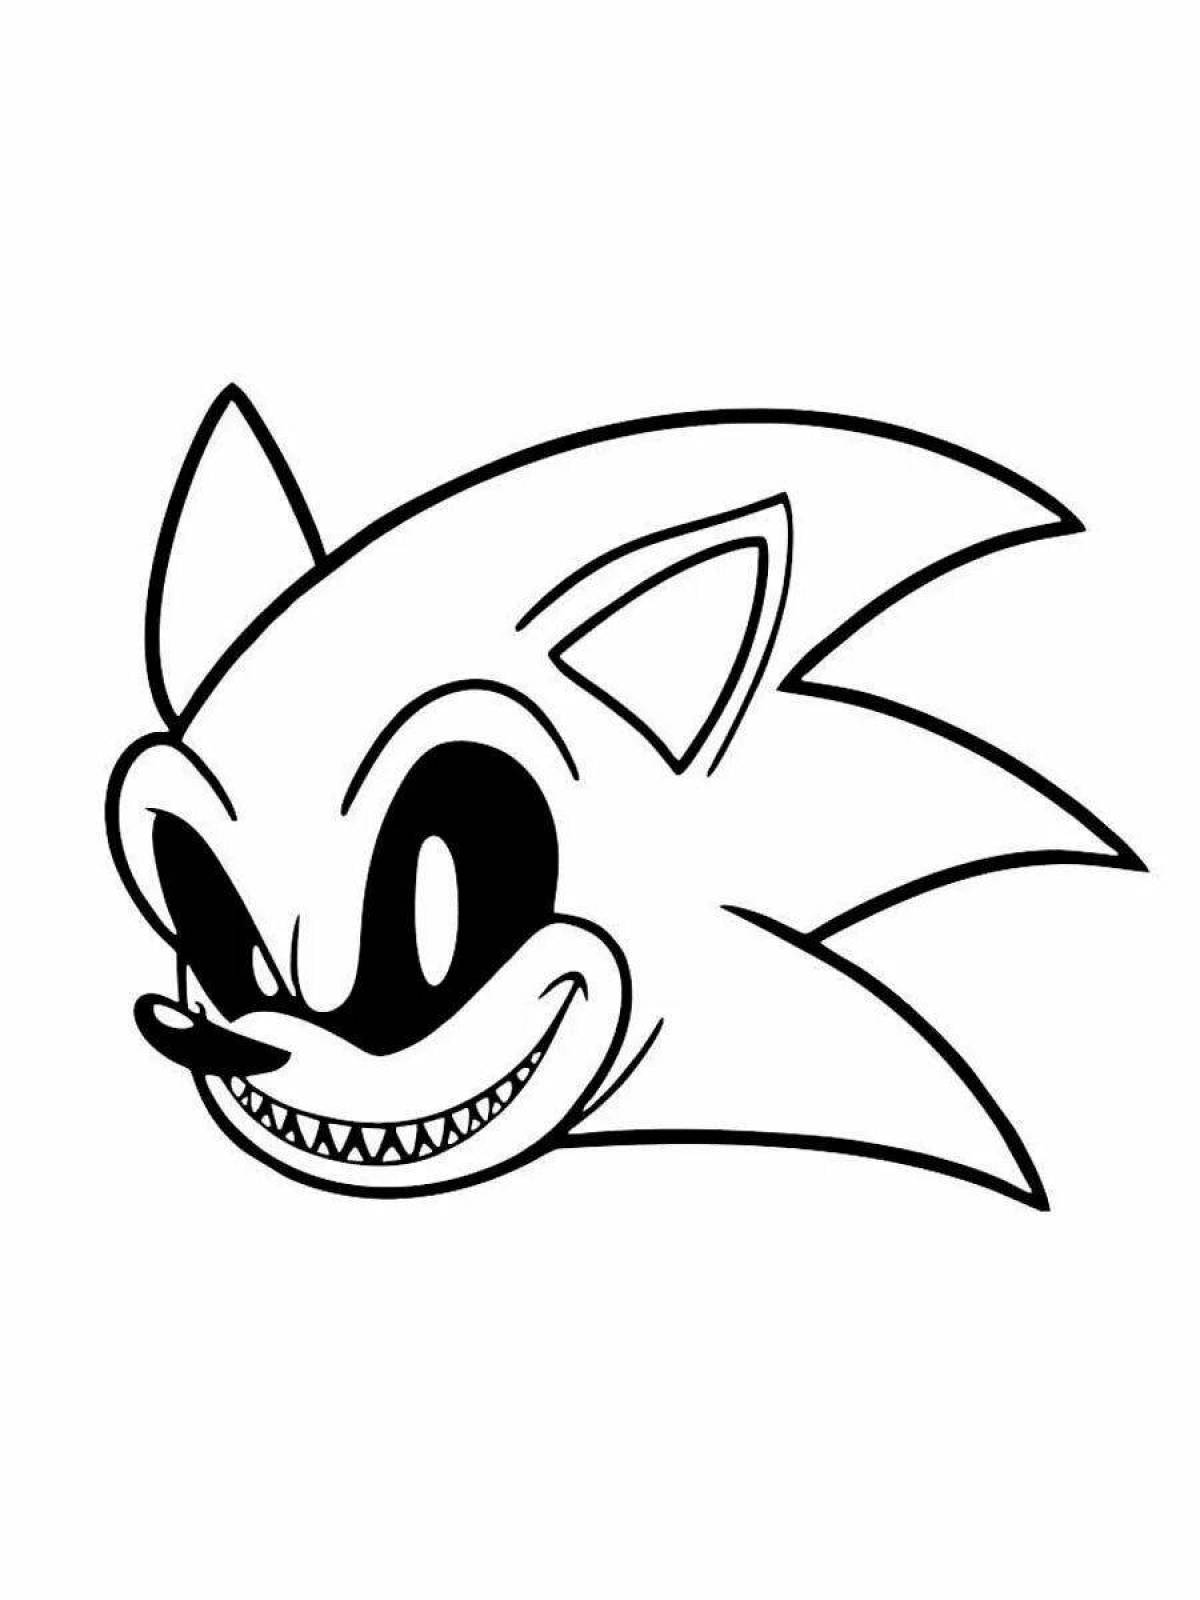 A wonderful sonic coloring page